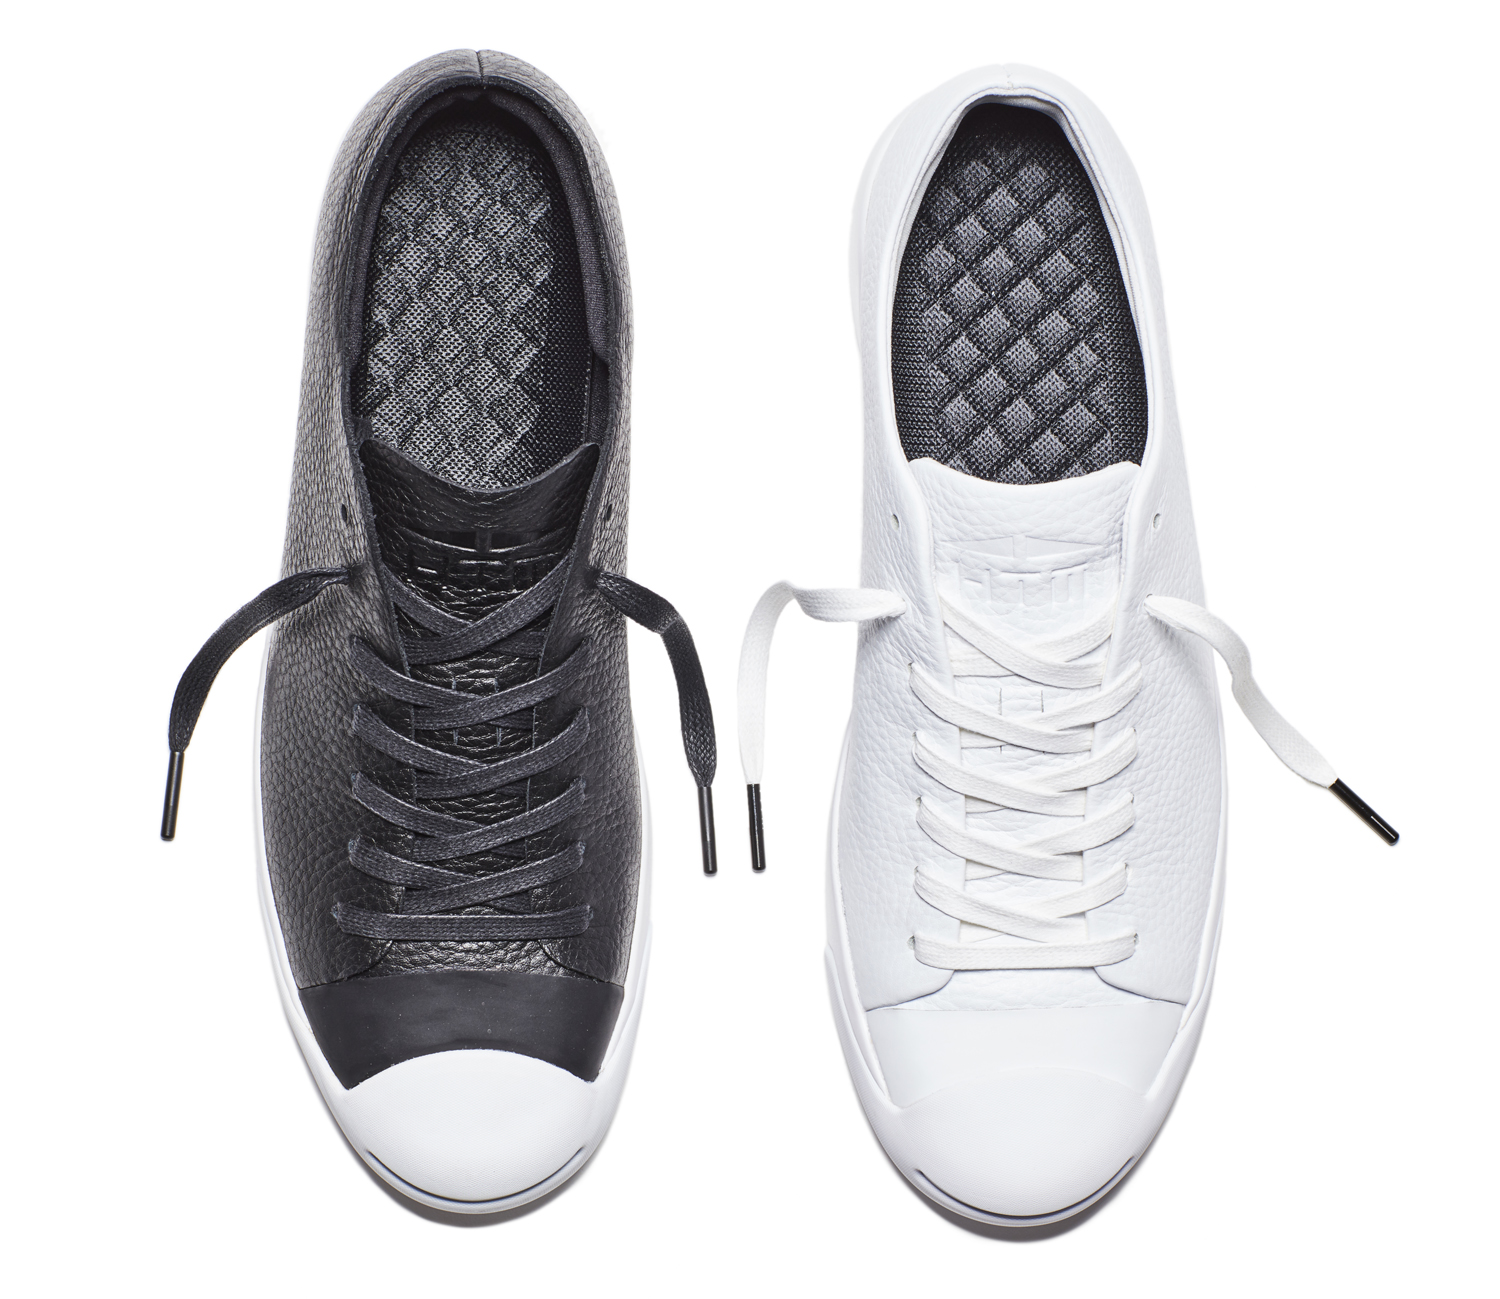 nike converse jack purcell